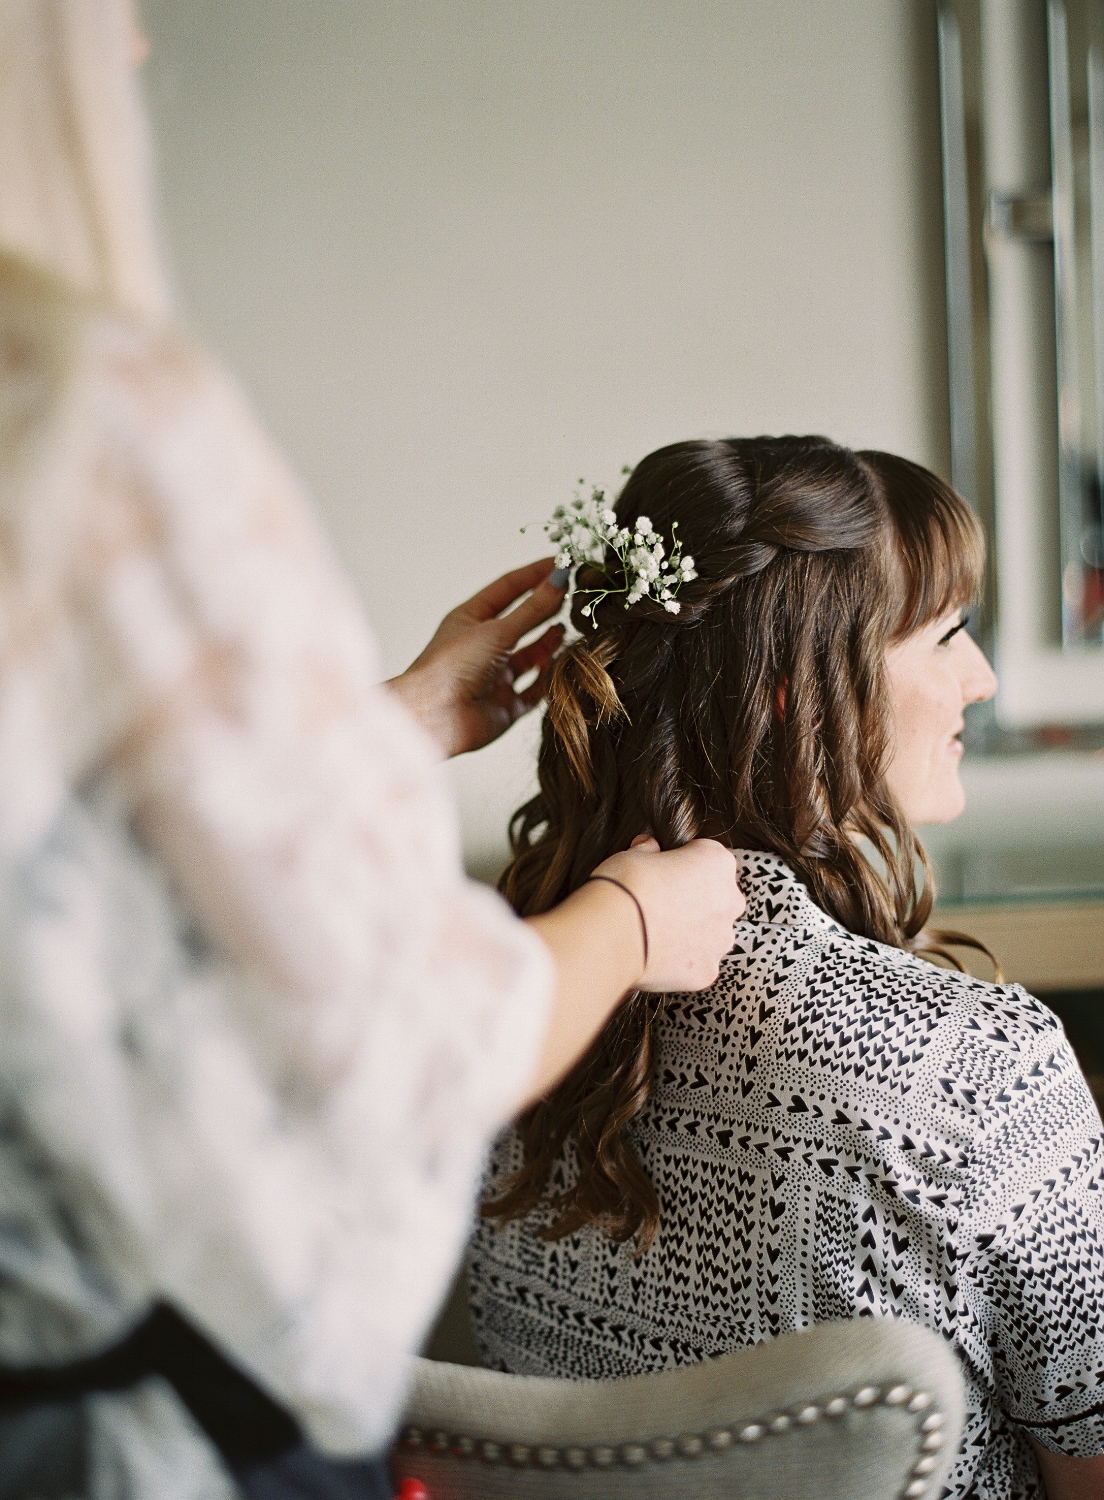 Brunette Bride with Curled Hairstyle Down, bangs and flowers in hair. Wedding makeup and hair by Vanity Belle in Orange County (Costa Mesa) and San Diego (La Jolla)